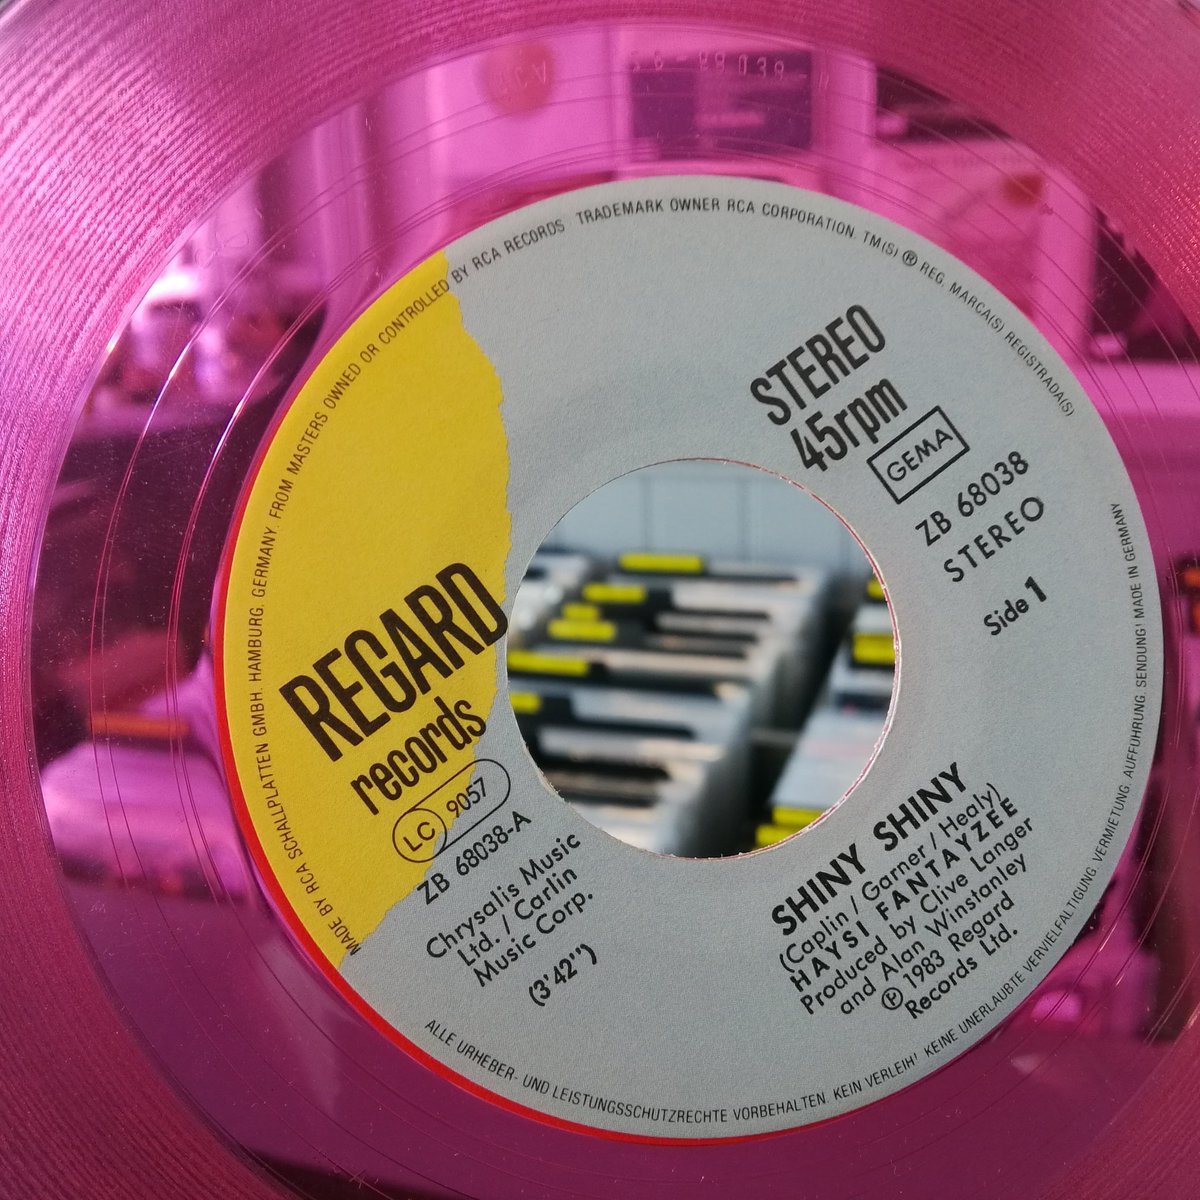 'I ain't lying cos there ain't no time, no city it's a pity cos I dress divine' the very underrated Haysi Fantayzee's ode to nuclear war, altogether now 'Shiny Shiny bad times behind me ...' Beautiful German pink vinyl 7' #haysifantayzee #jeremyhealy #kategarner #colouredvinyl